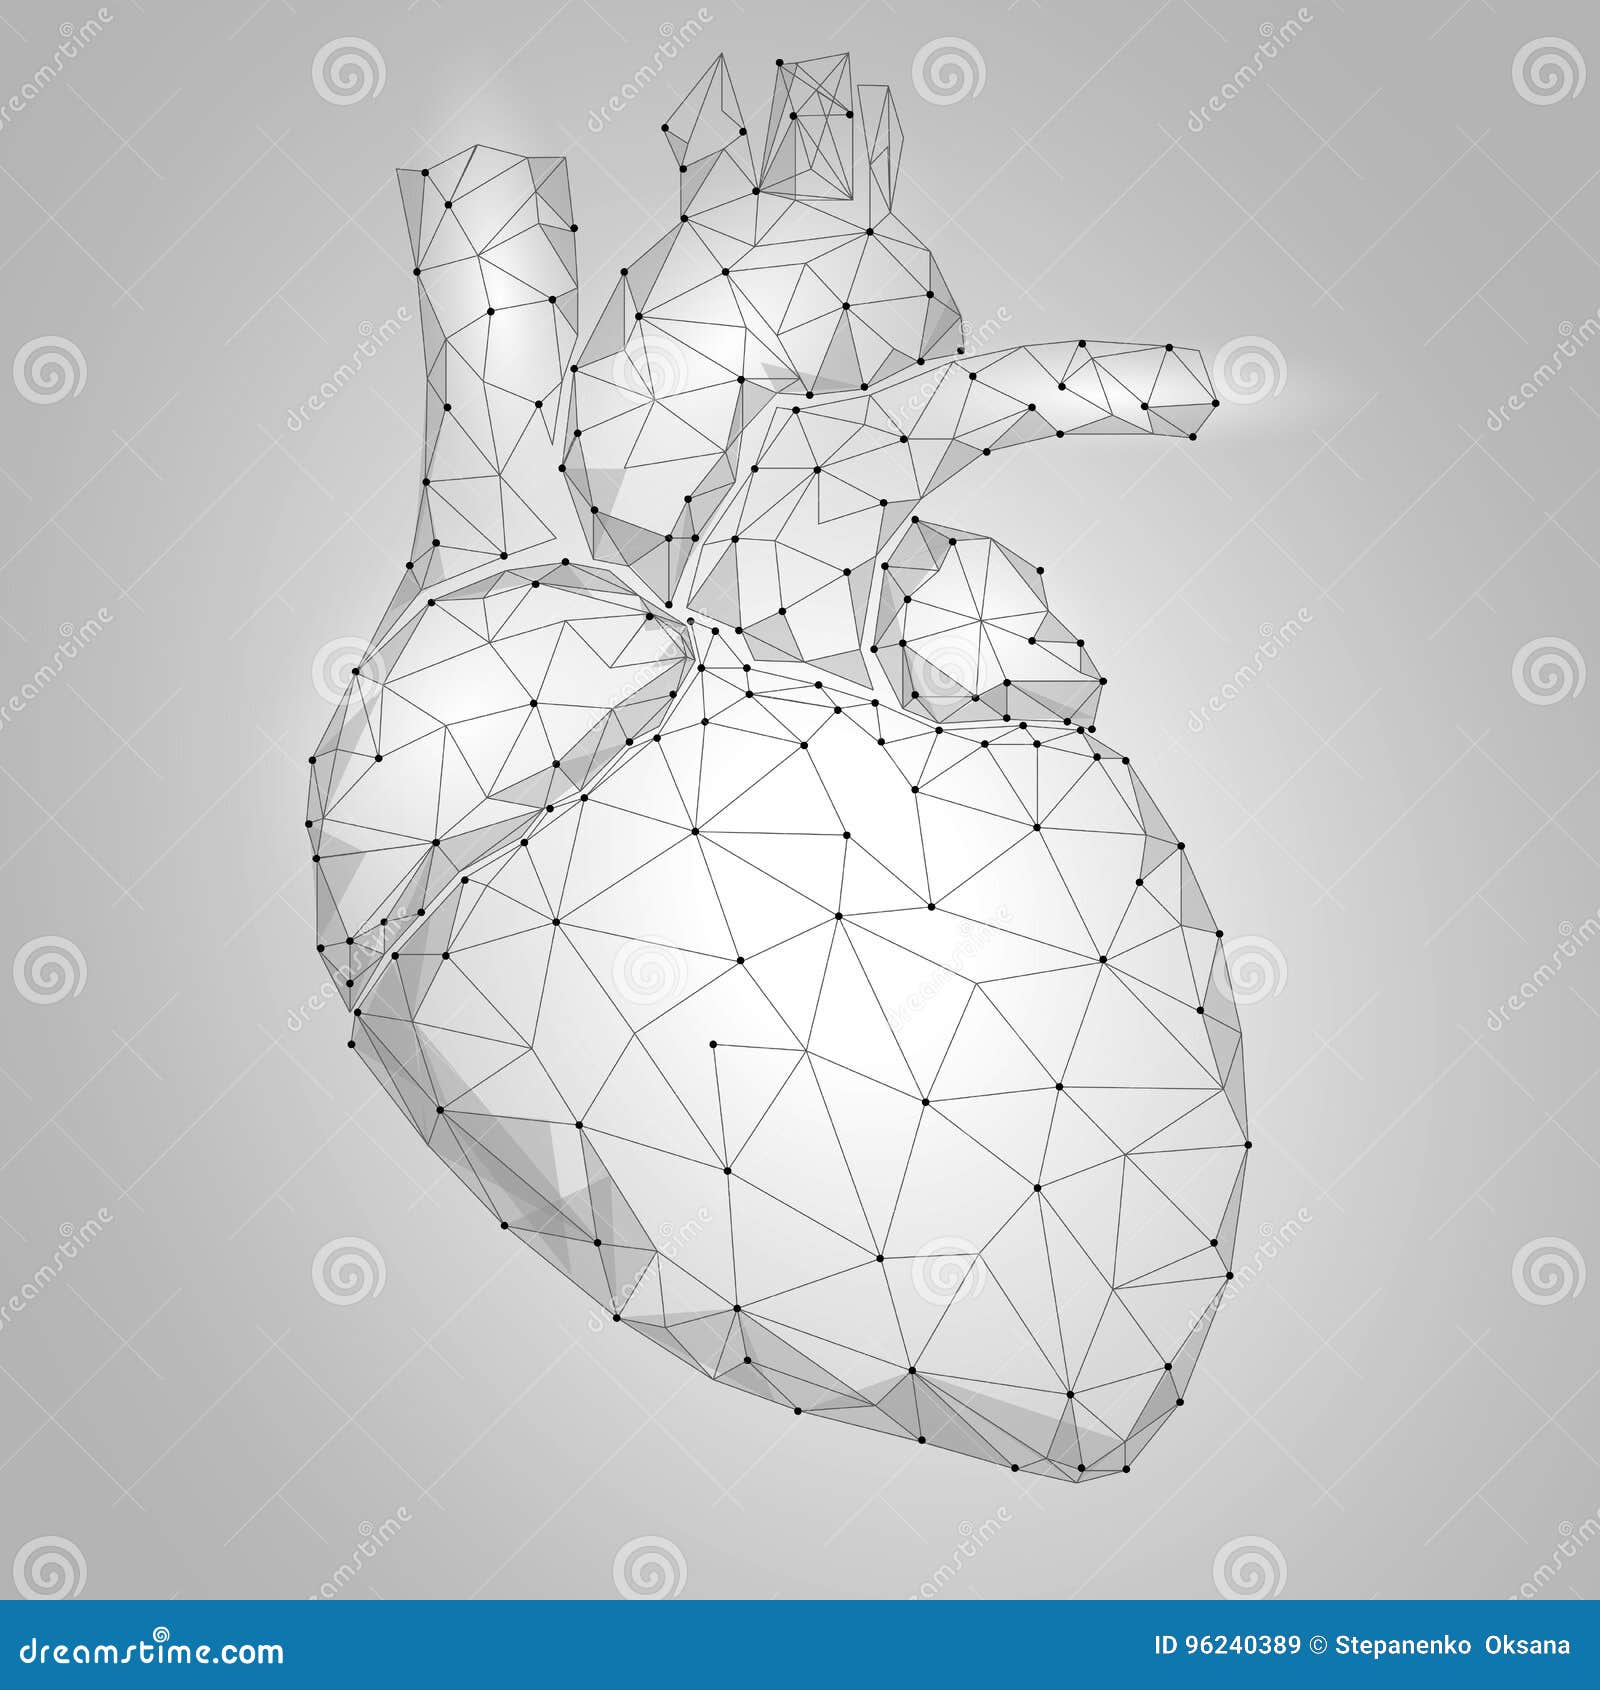 Human Heart Internal Organ Triangle Low Poly. Connected Dots White Gray